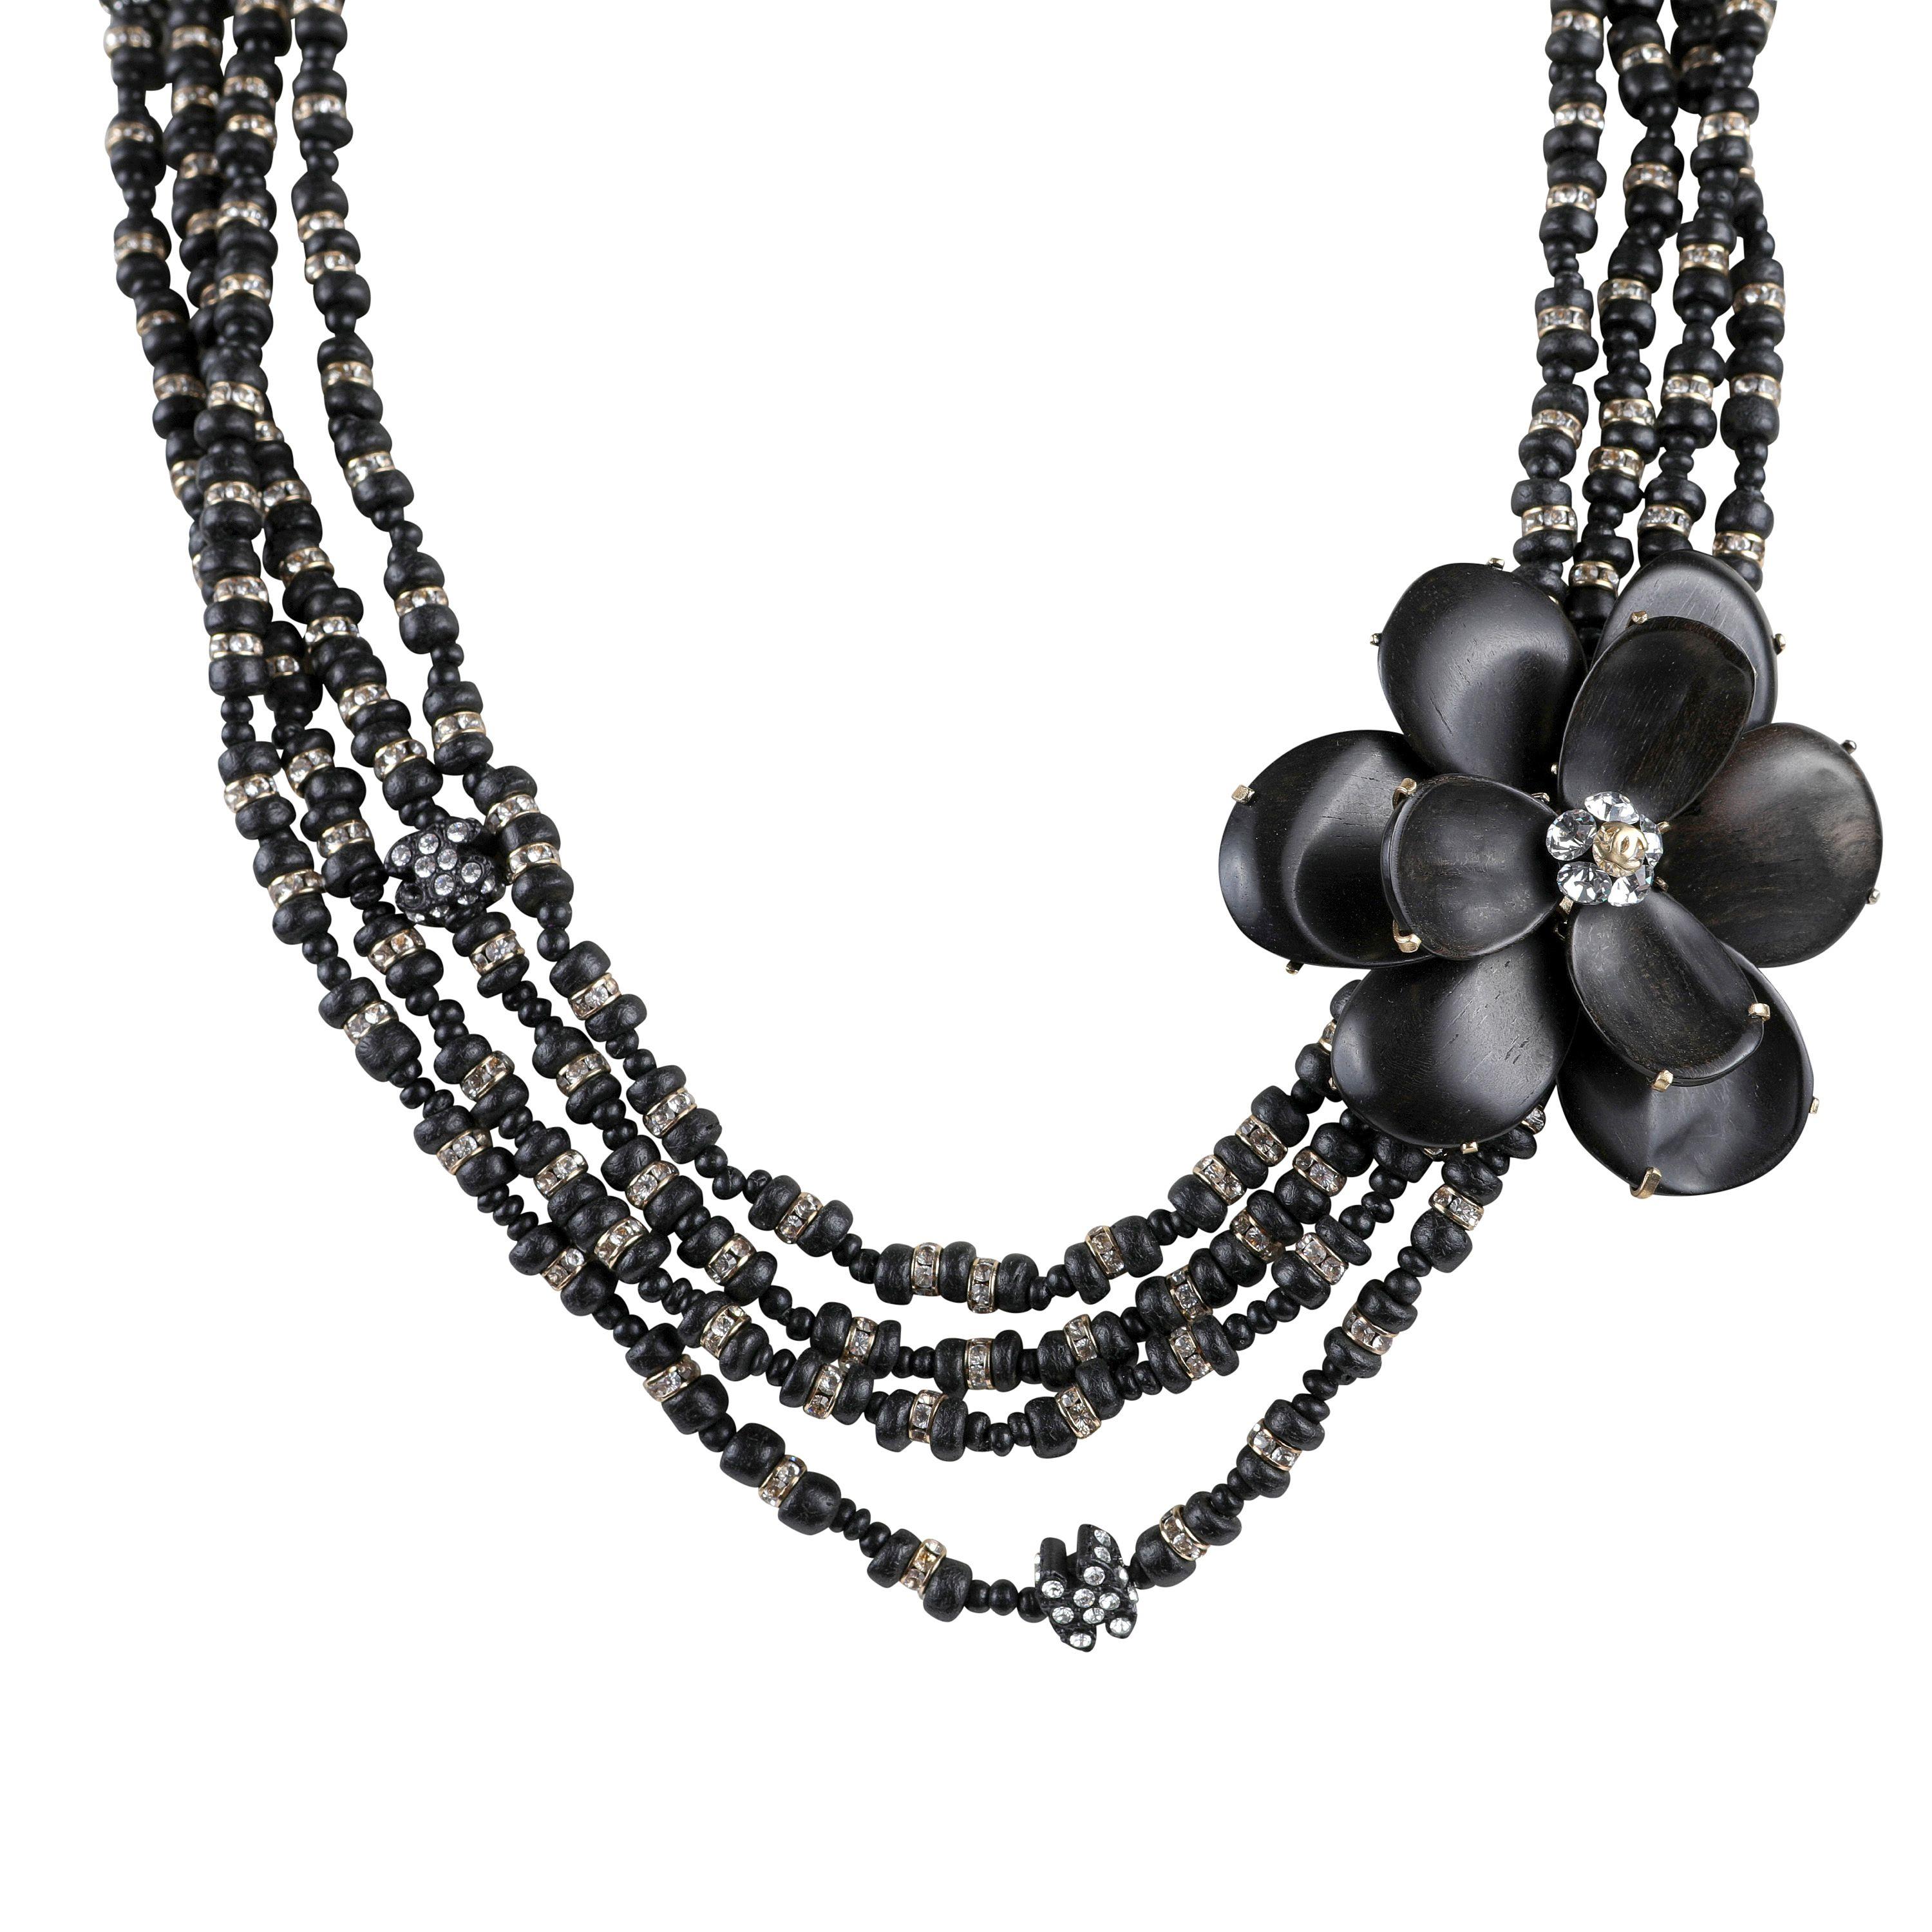 Chanel Black Wooden Beads and Camellia Flower Necklace In Excellent Condition For Sale In Palm Beach, FL